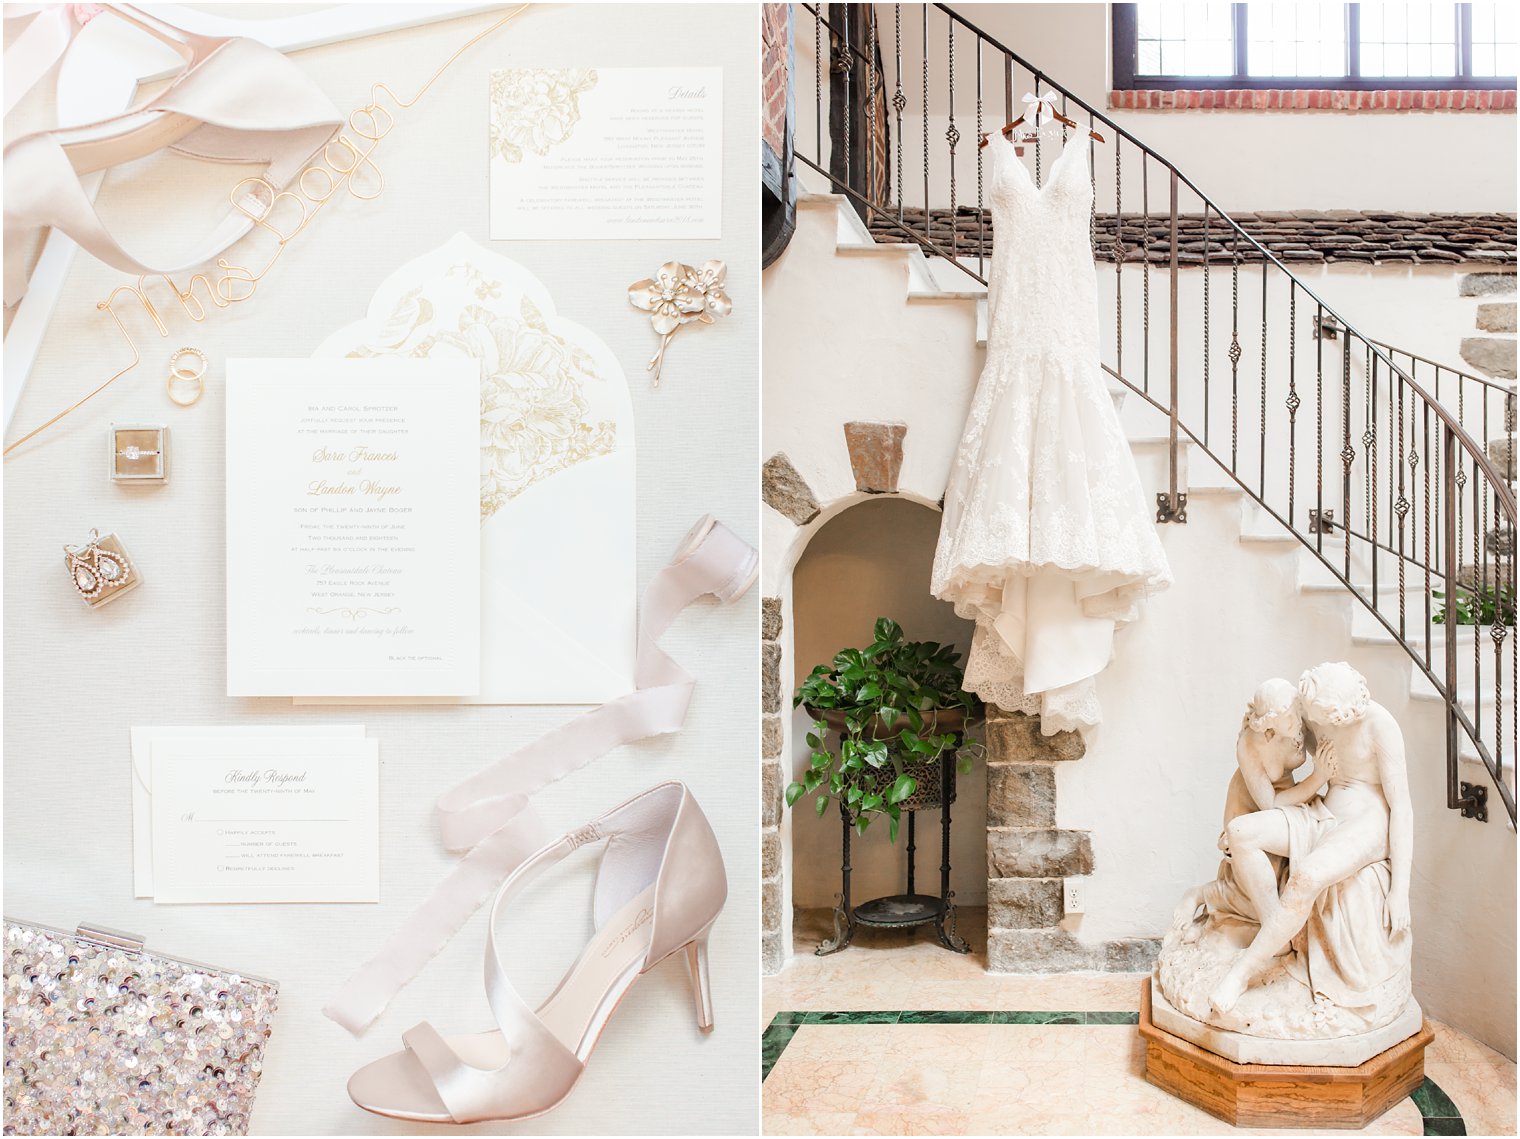 wedding invitation and dress at Pleasantdale Chateau